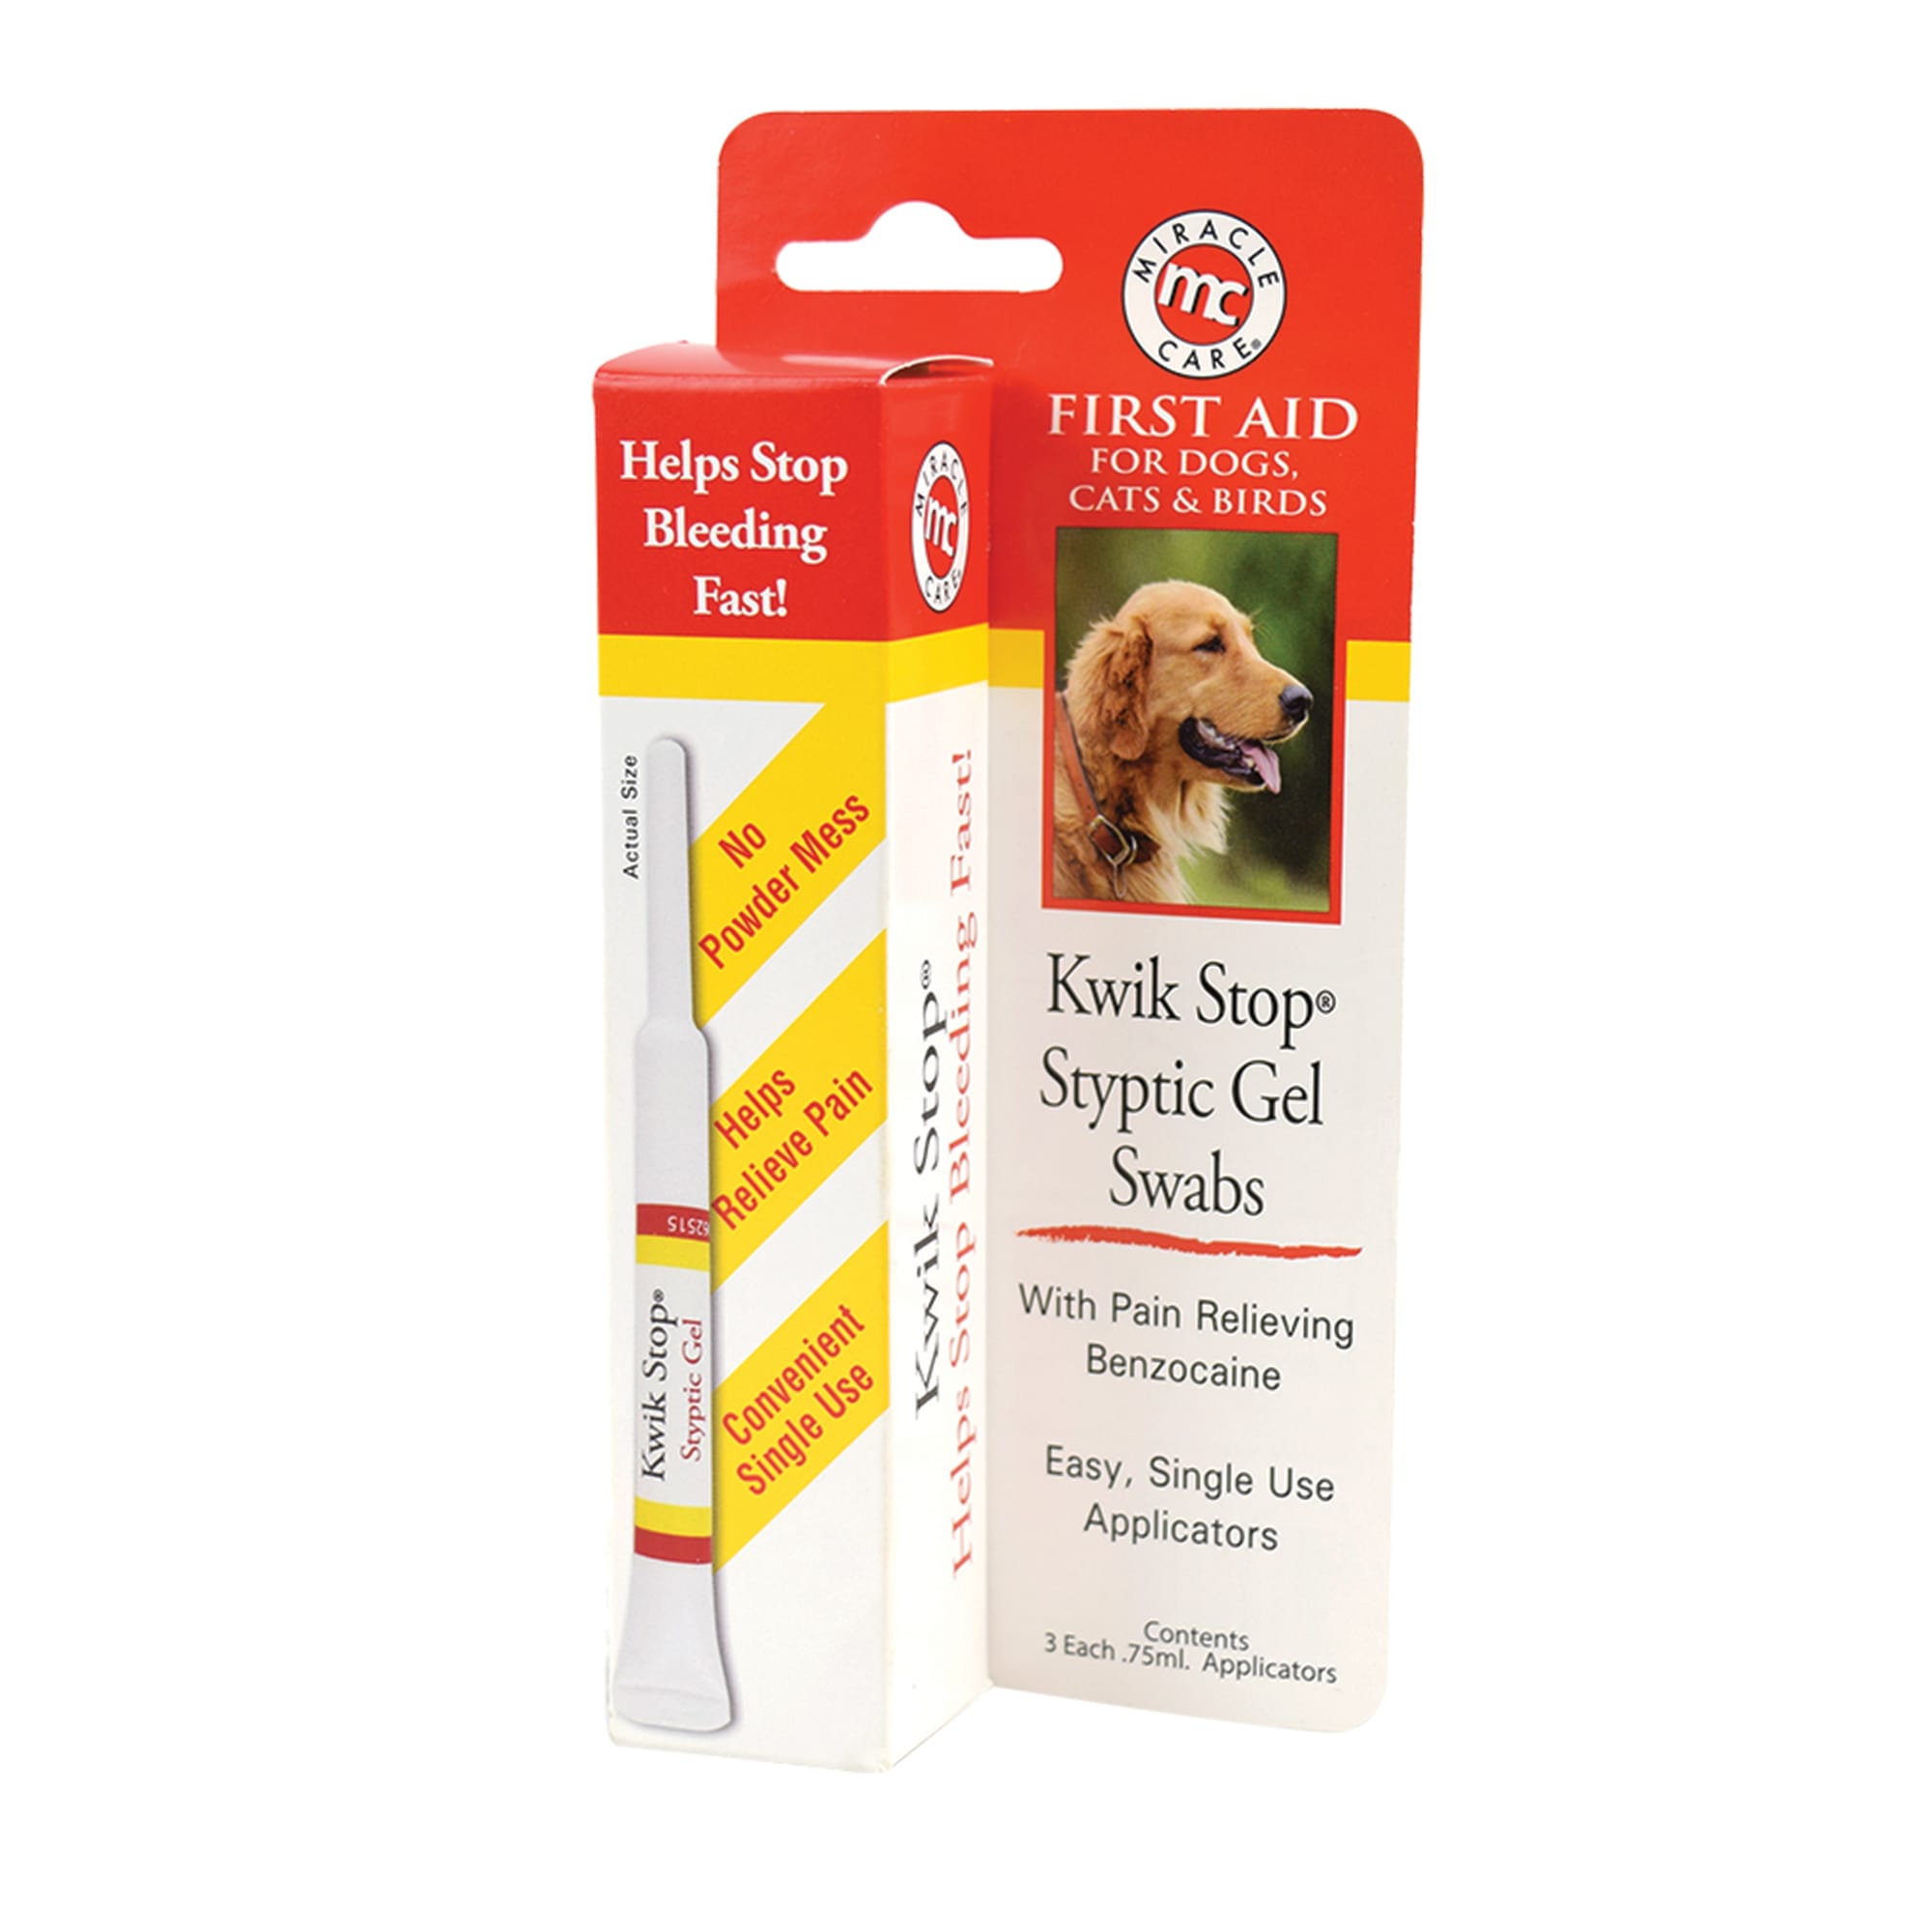 Miracle Care Kwik Stop Styptic Gel Swabs for Dogs, Count of 3